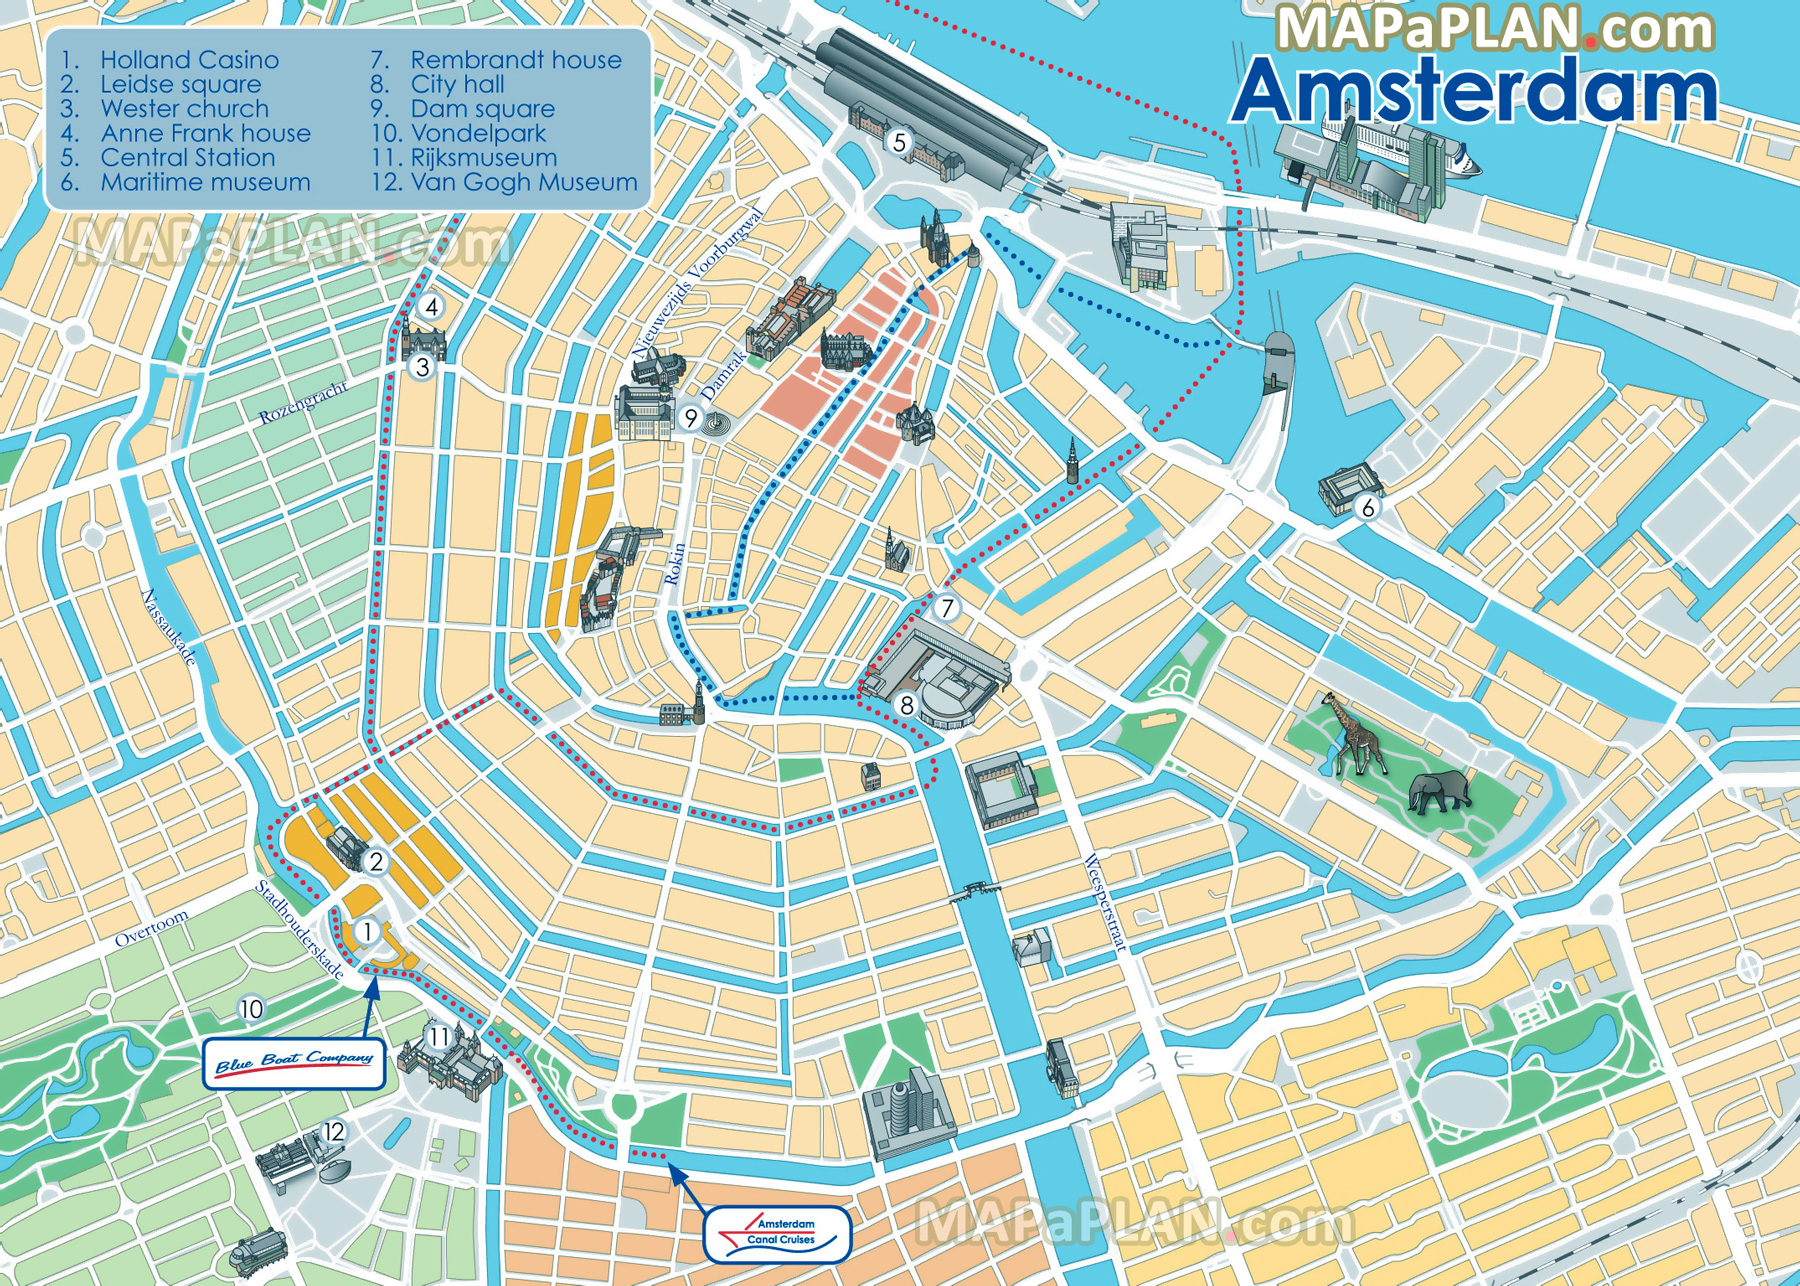 Blue Boat Company canal cruises water routes Amsterdam top tourist attractions map